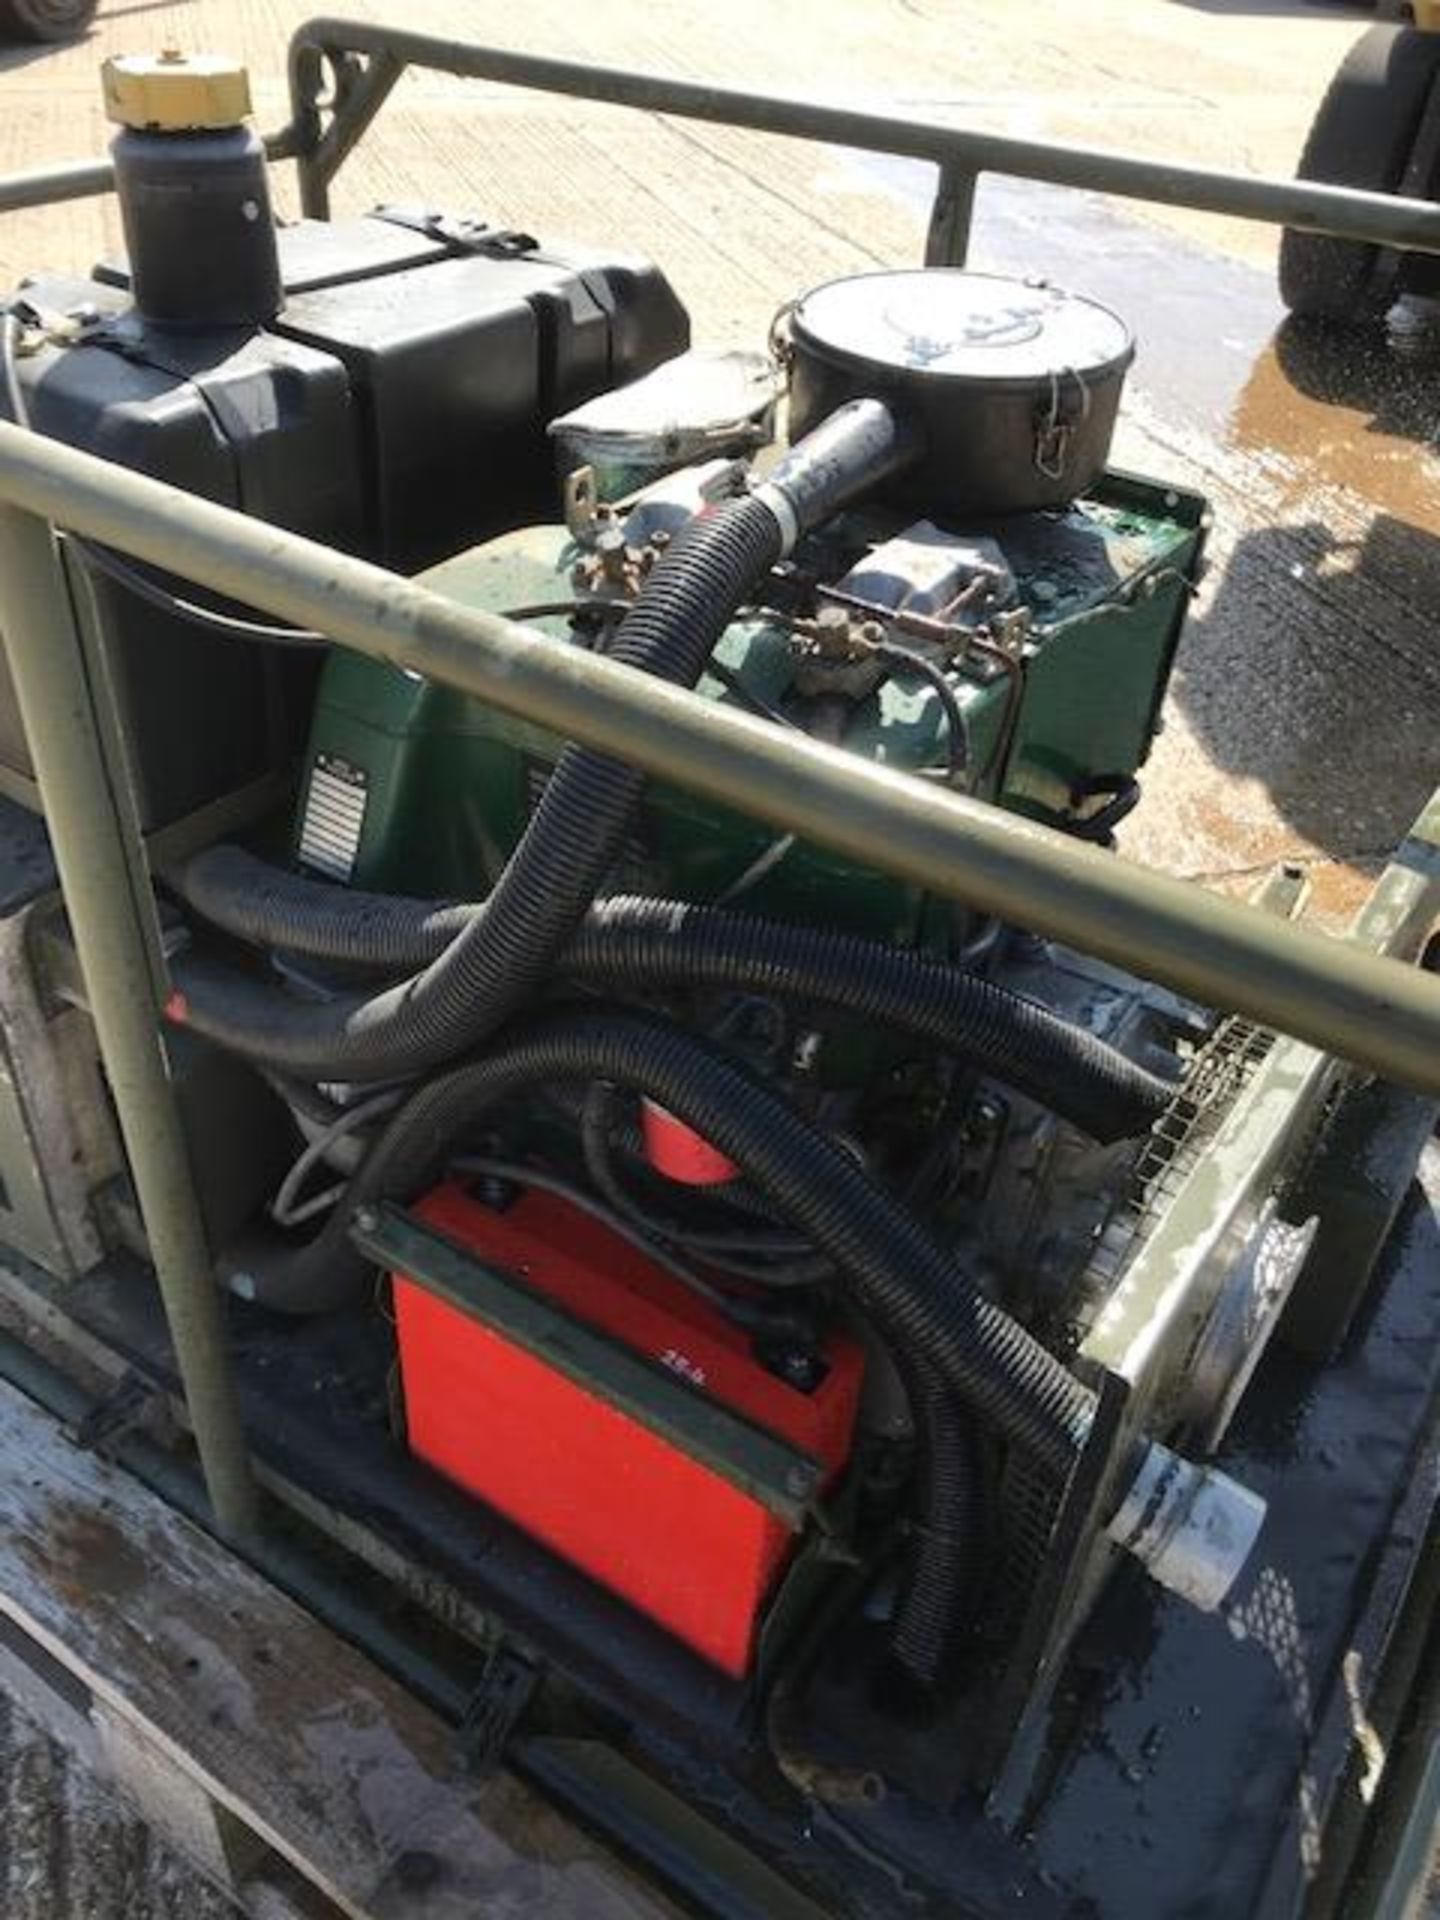 5.6 KVA 240 VOLT DIESEL GENERATOR SINGLE PHASE 50 CPS 279 hrs - Image 3 of 7